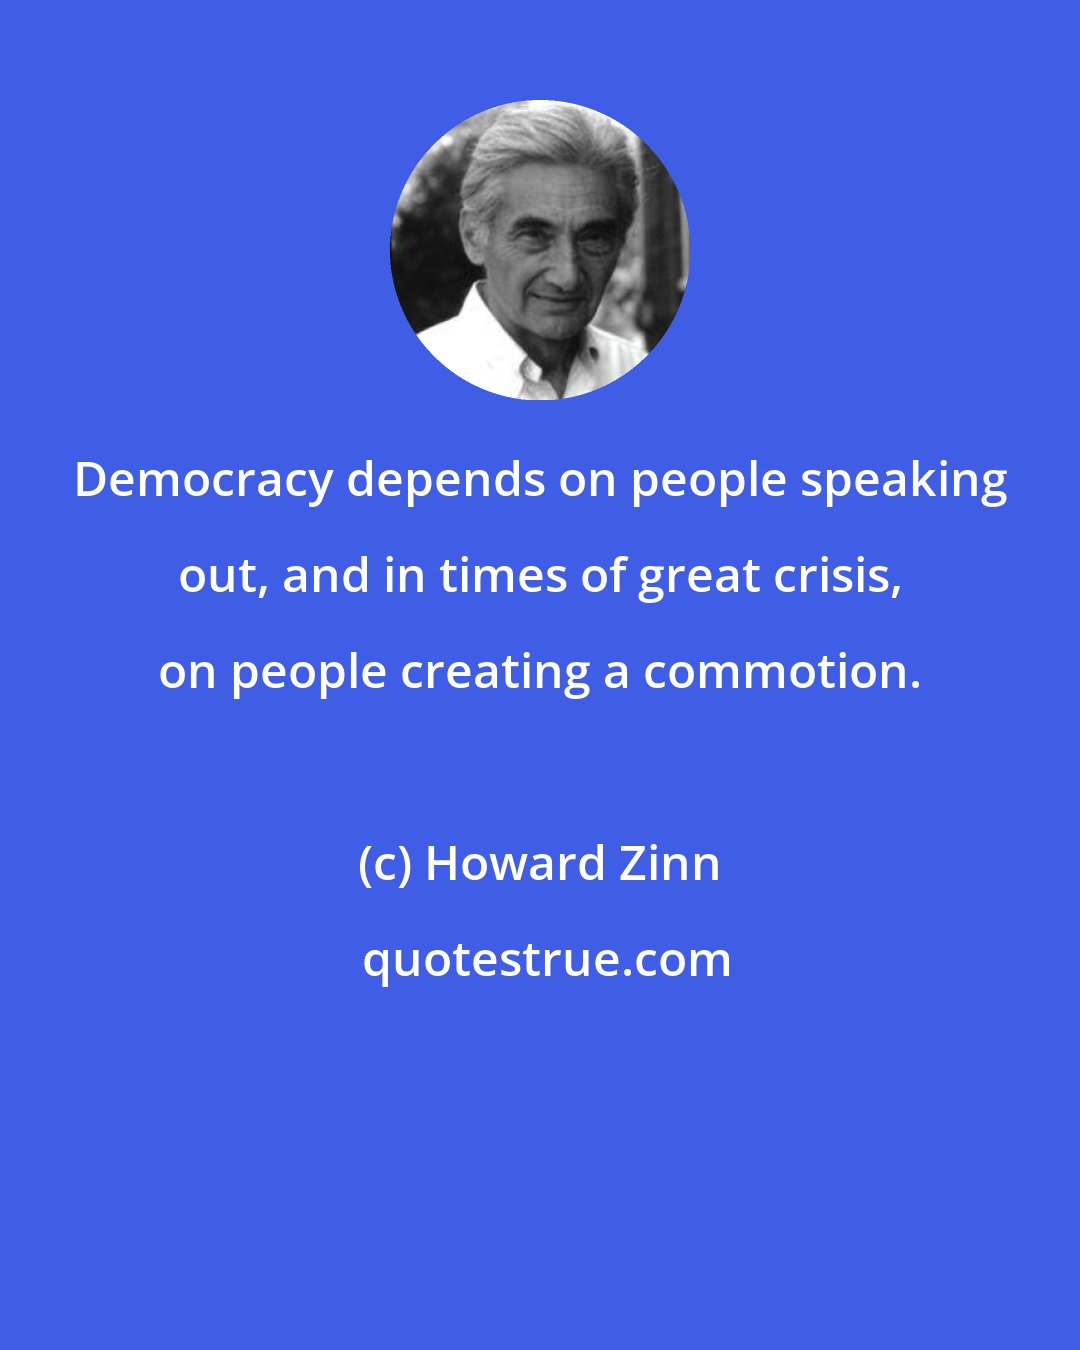 Howard Zinn: Democracy depends on people speaking out, and in times of great crisis, on people creating a commotion.